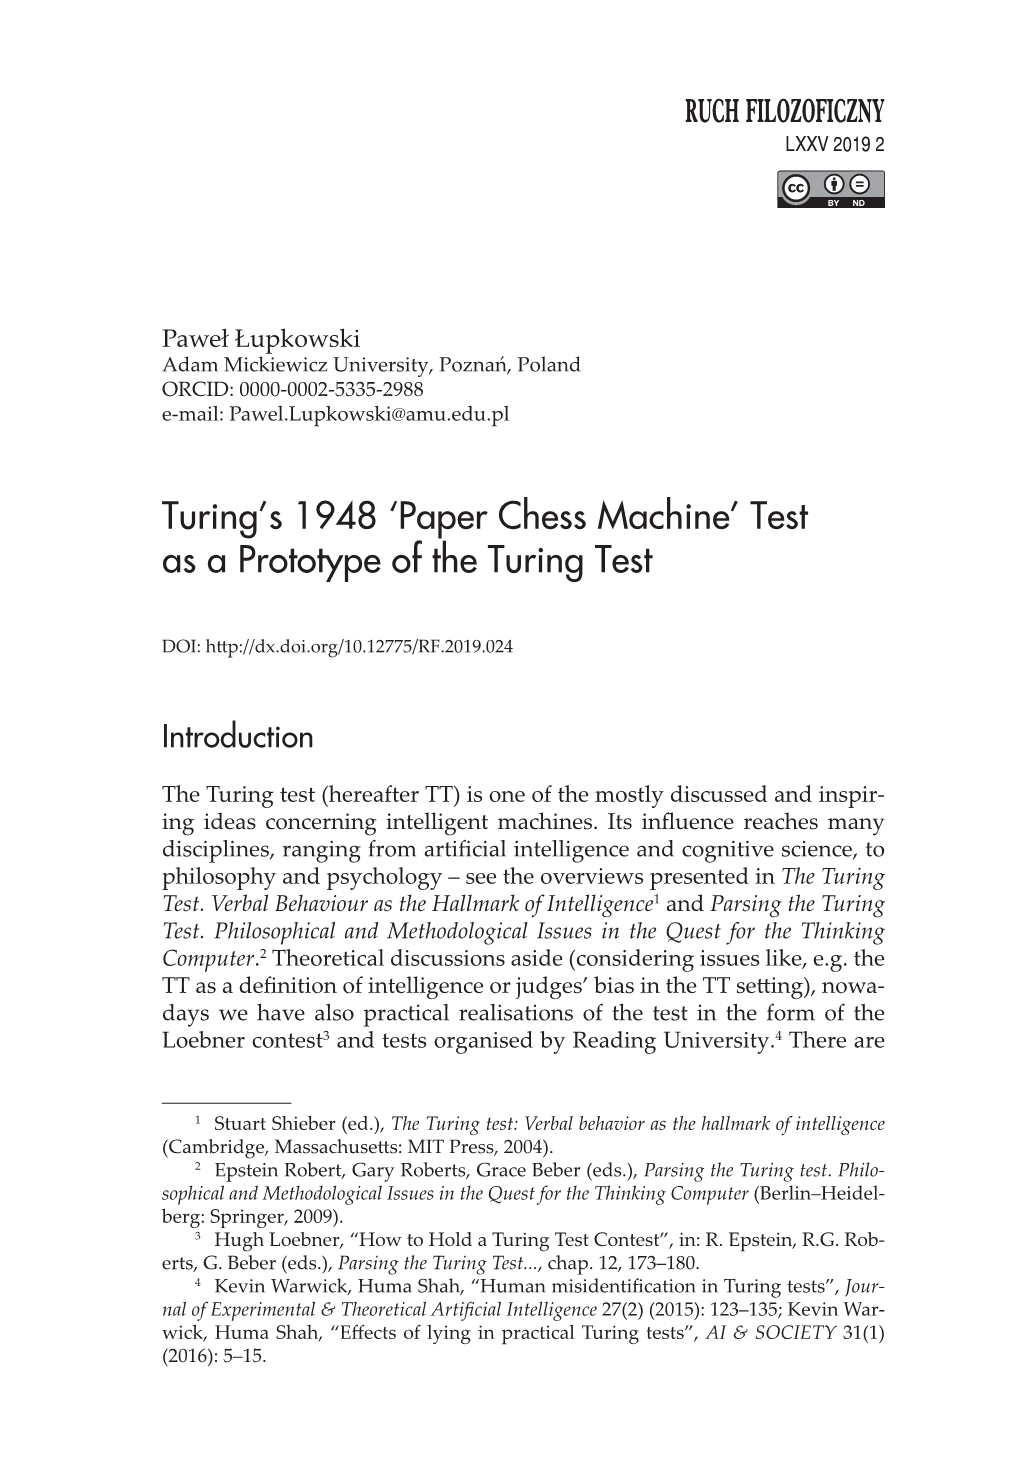 Turing's 1948 'Paper Chess Machine' Test As a Prototype of the Turing Test